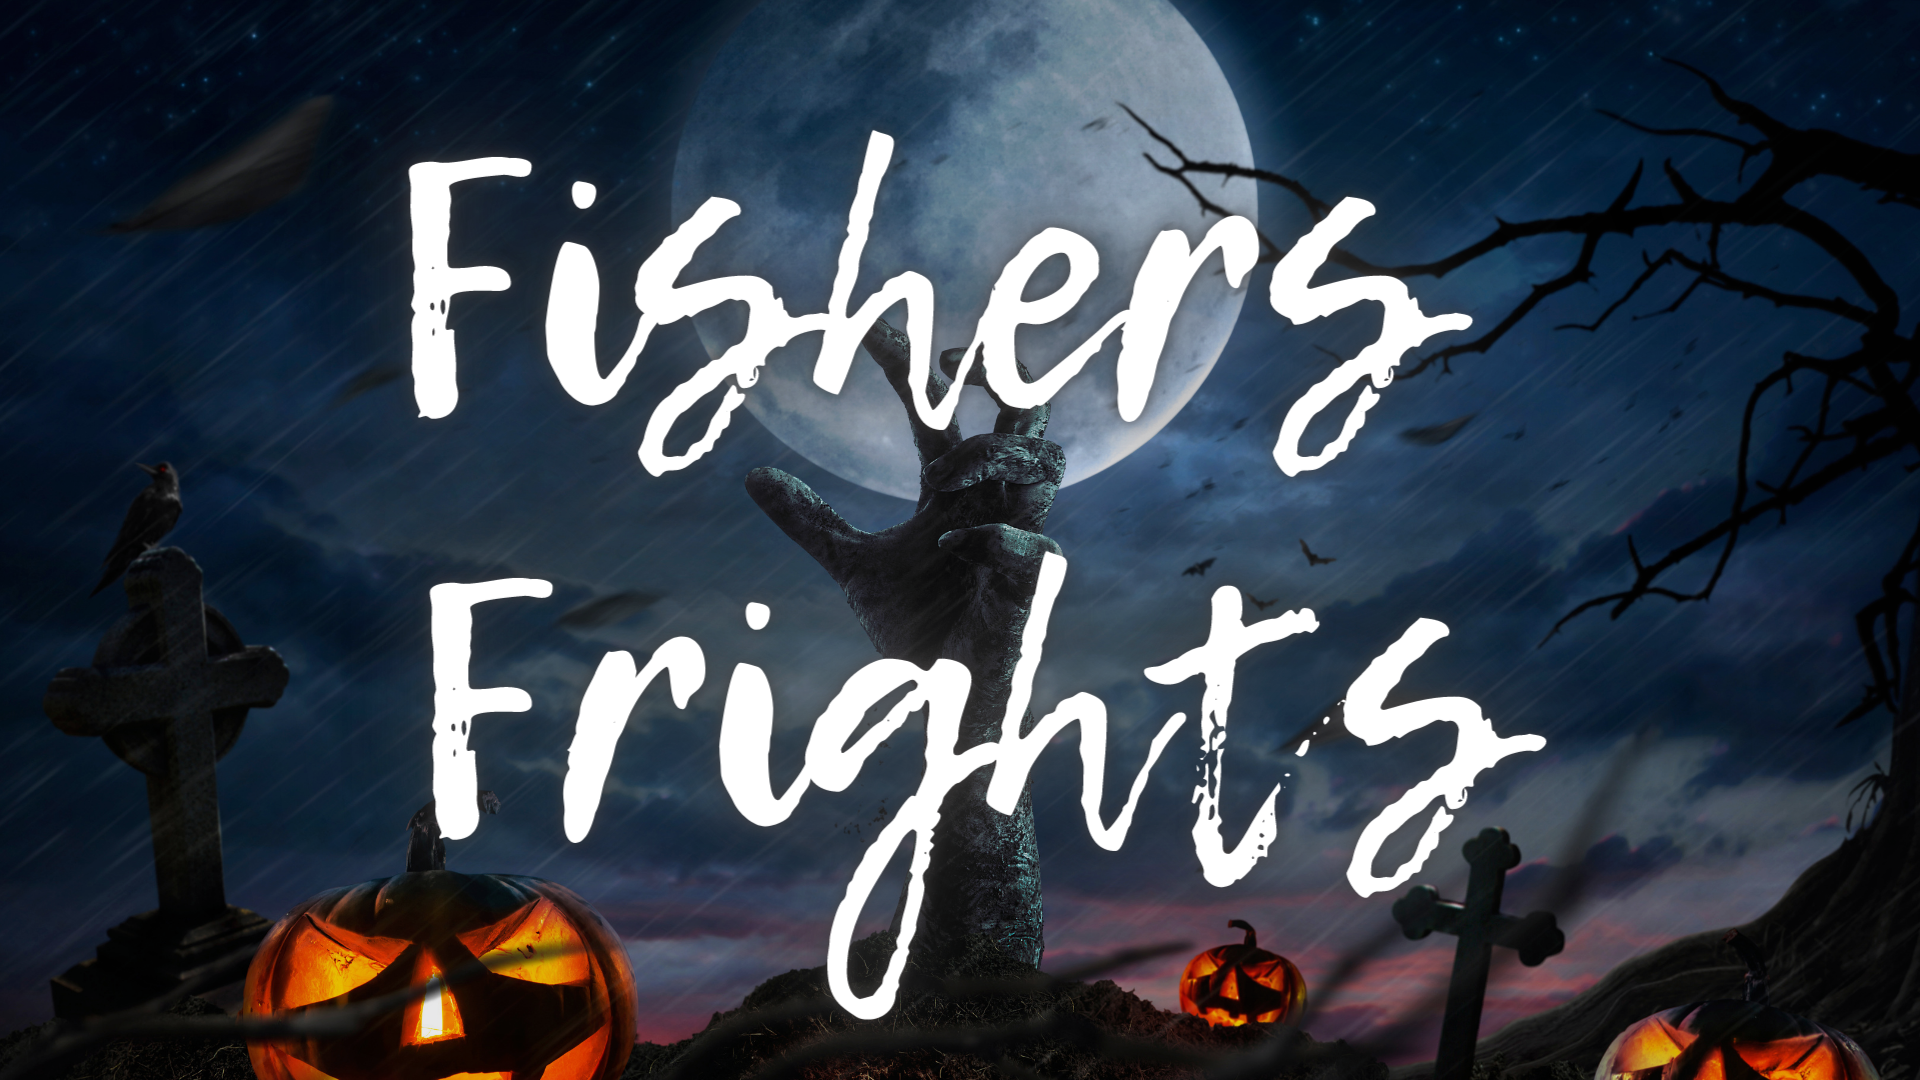 fishers frights